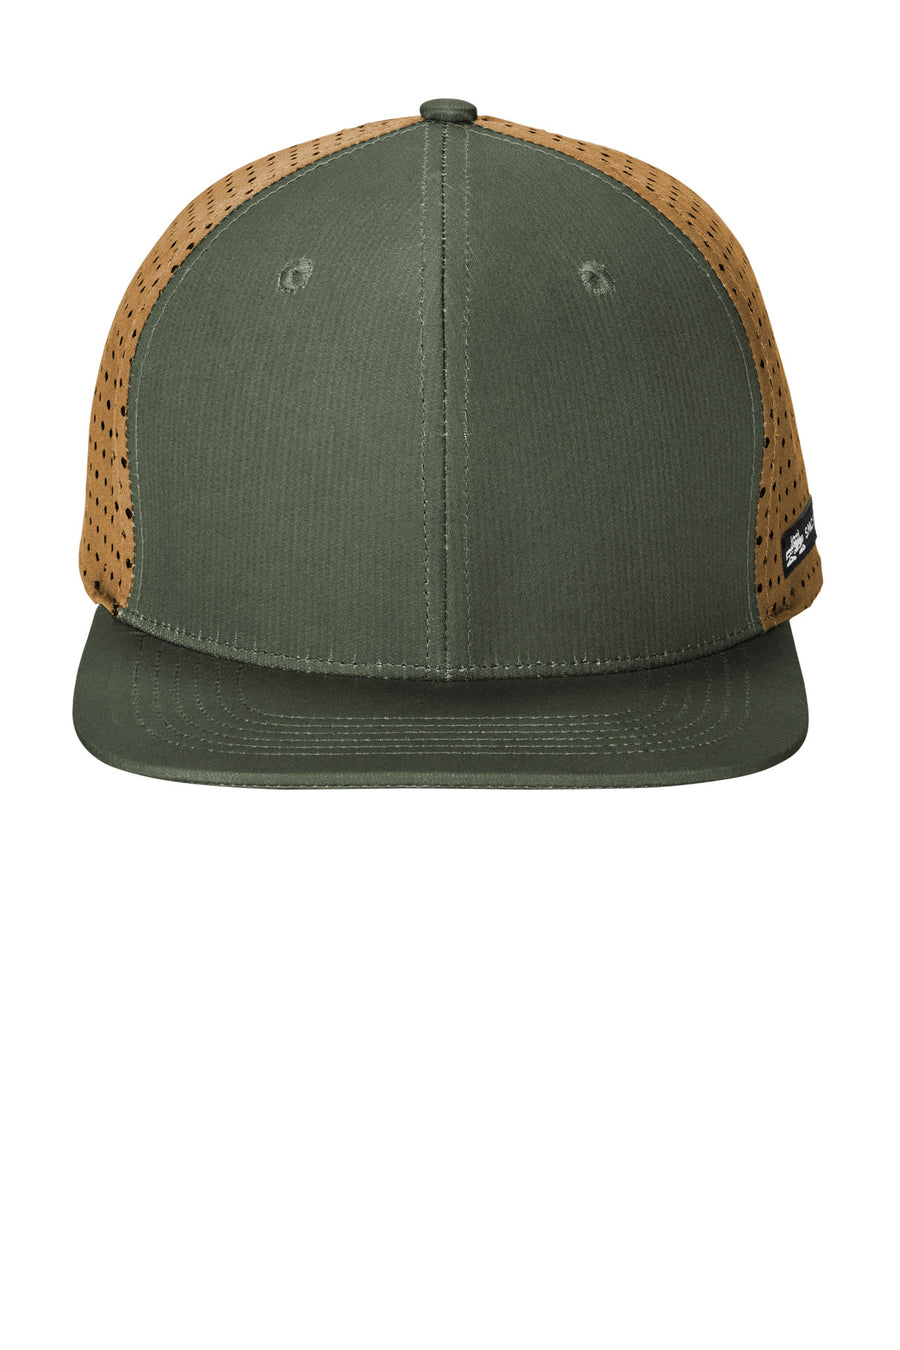 LIMITED EDITION Spacecraft Salish Perforated Cap